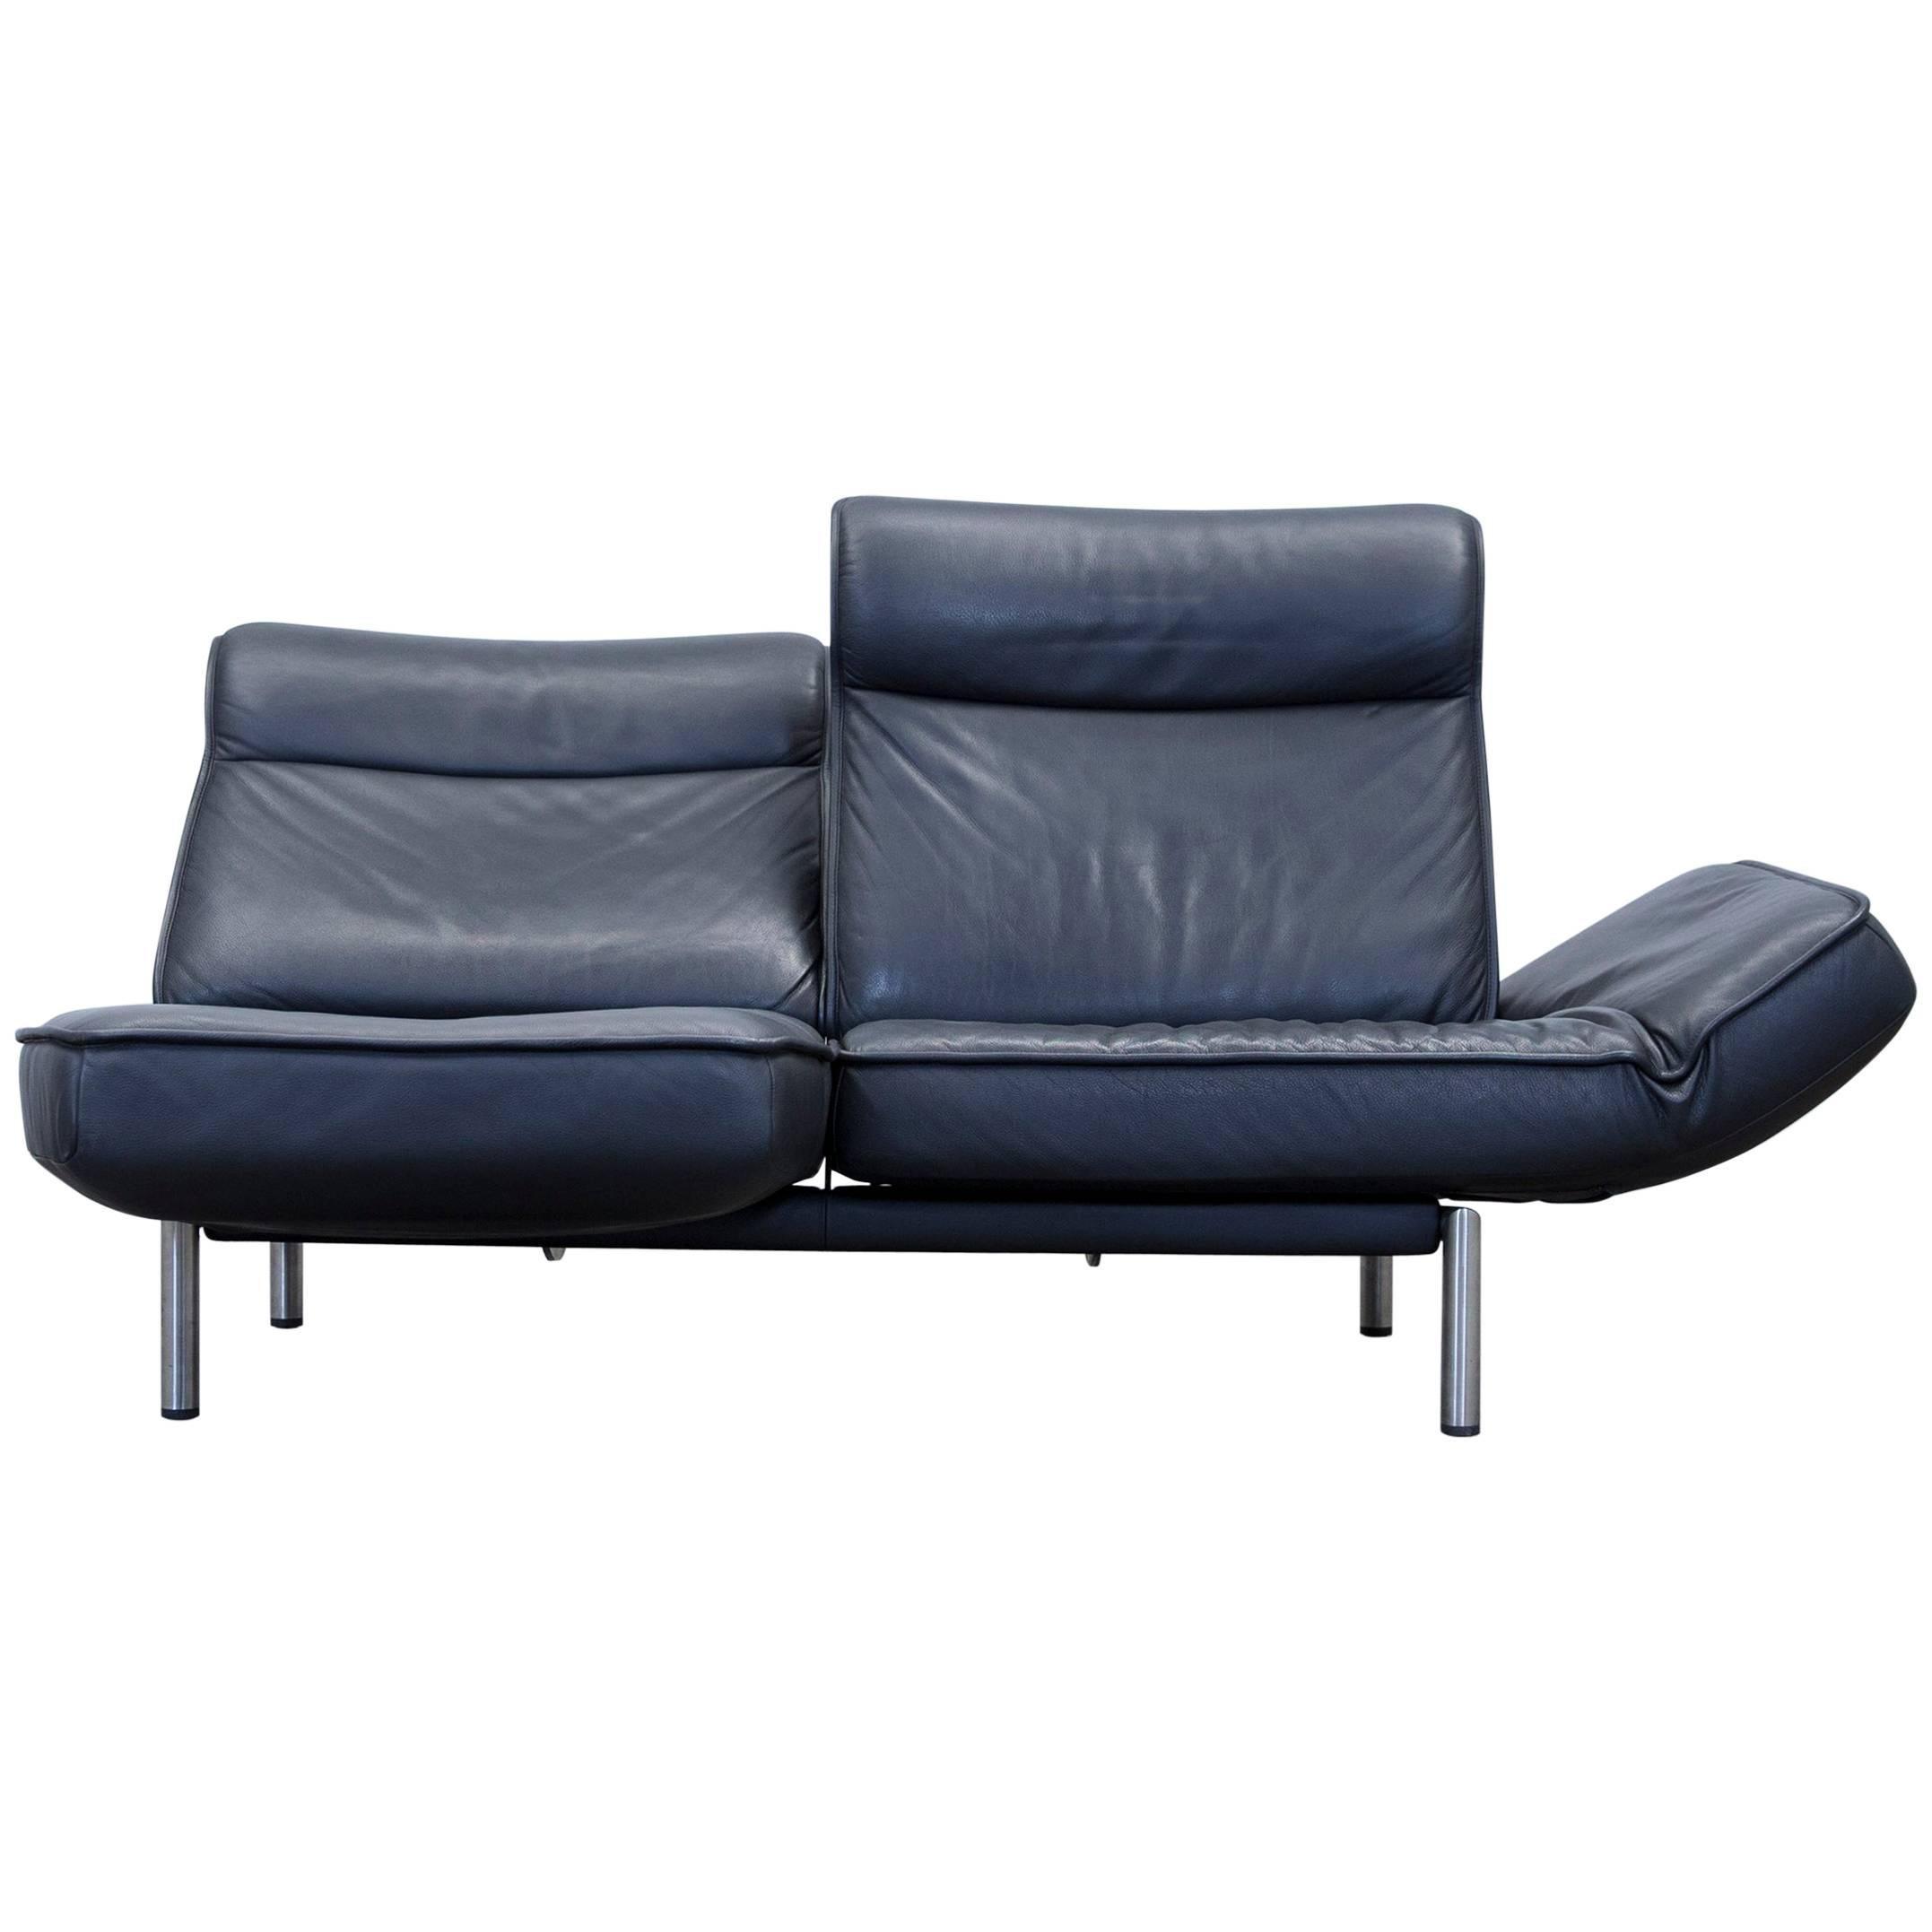 De Sede DS 450 Designer Leather Sofa Black Relax Function Two-seat Modern